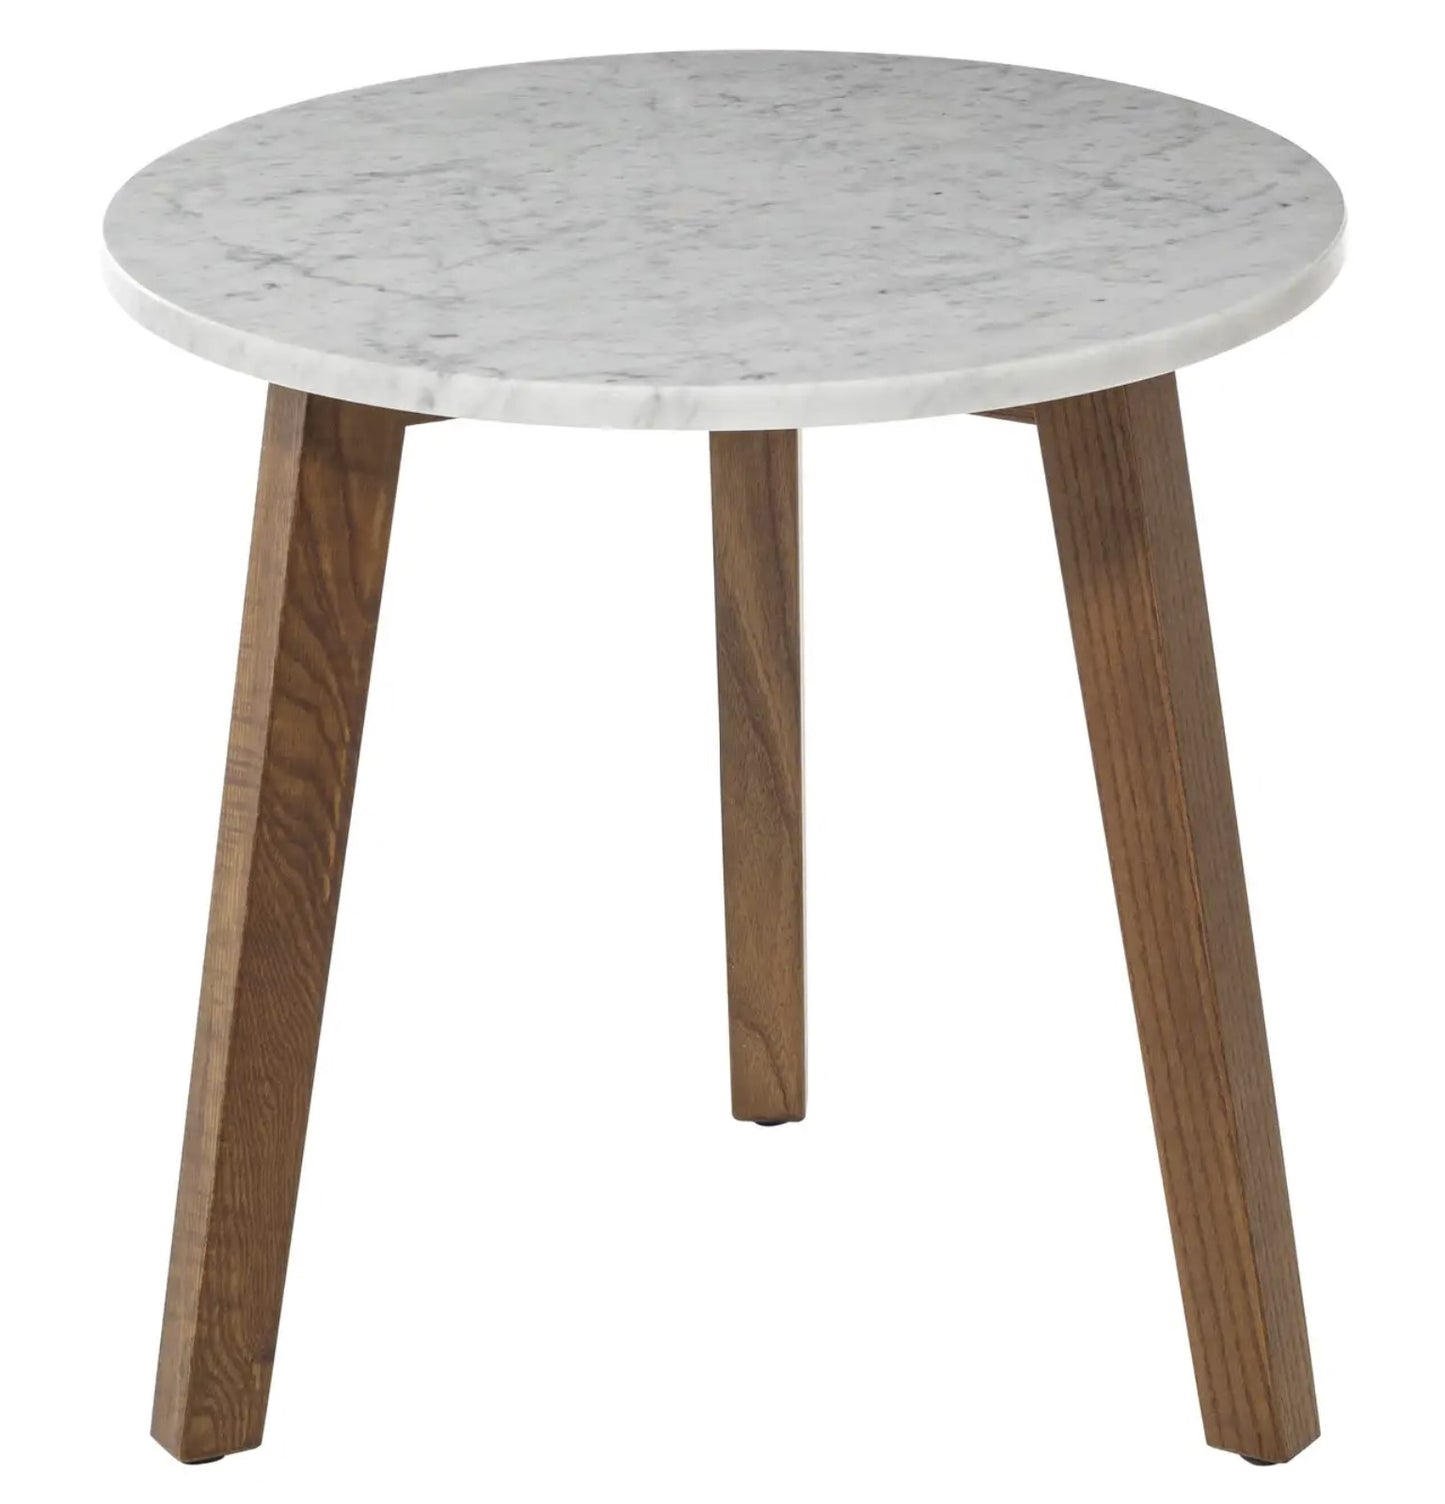 Small Inout Side Table in White Carrara Marble Top with Oiled Iroko - $1,145.00